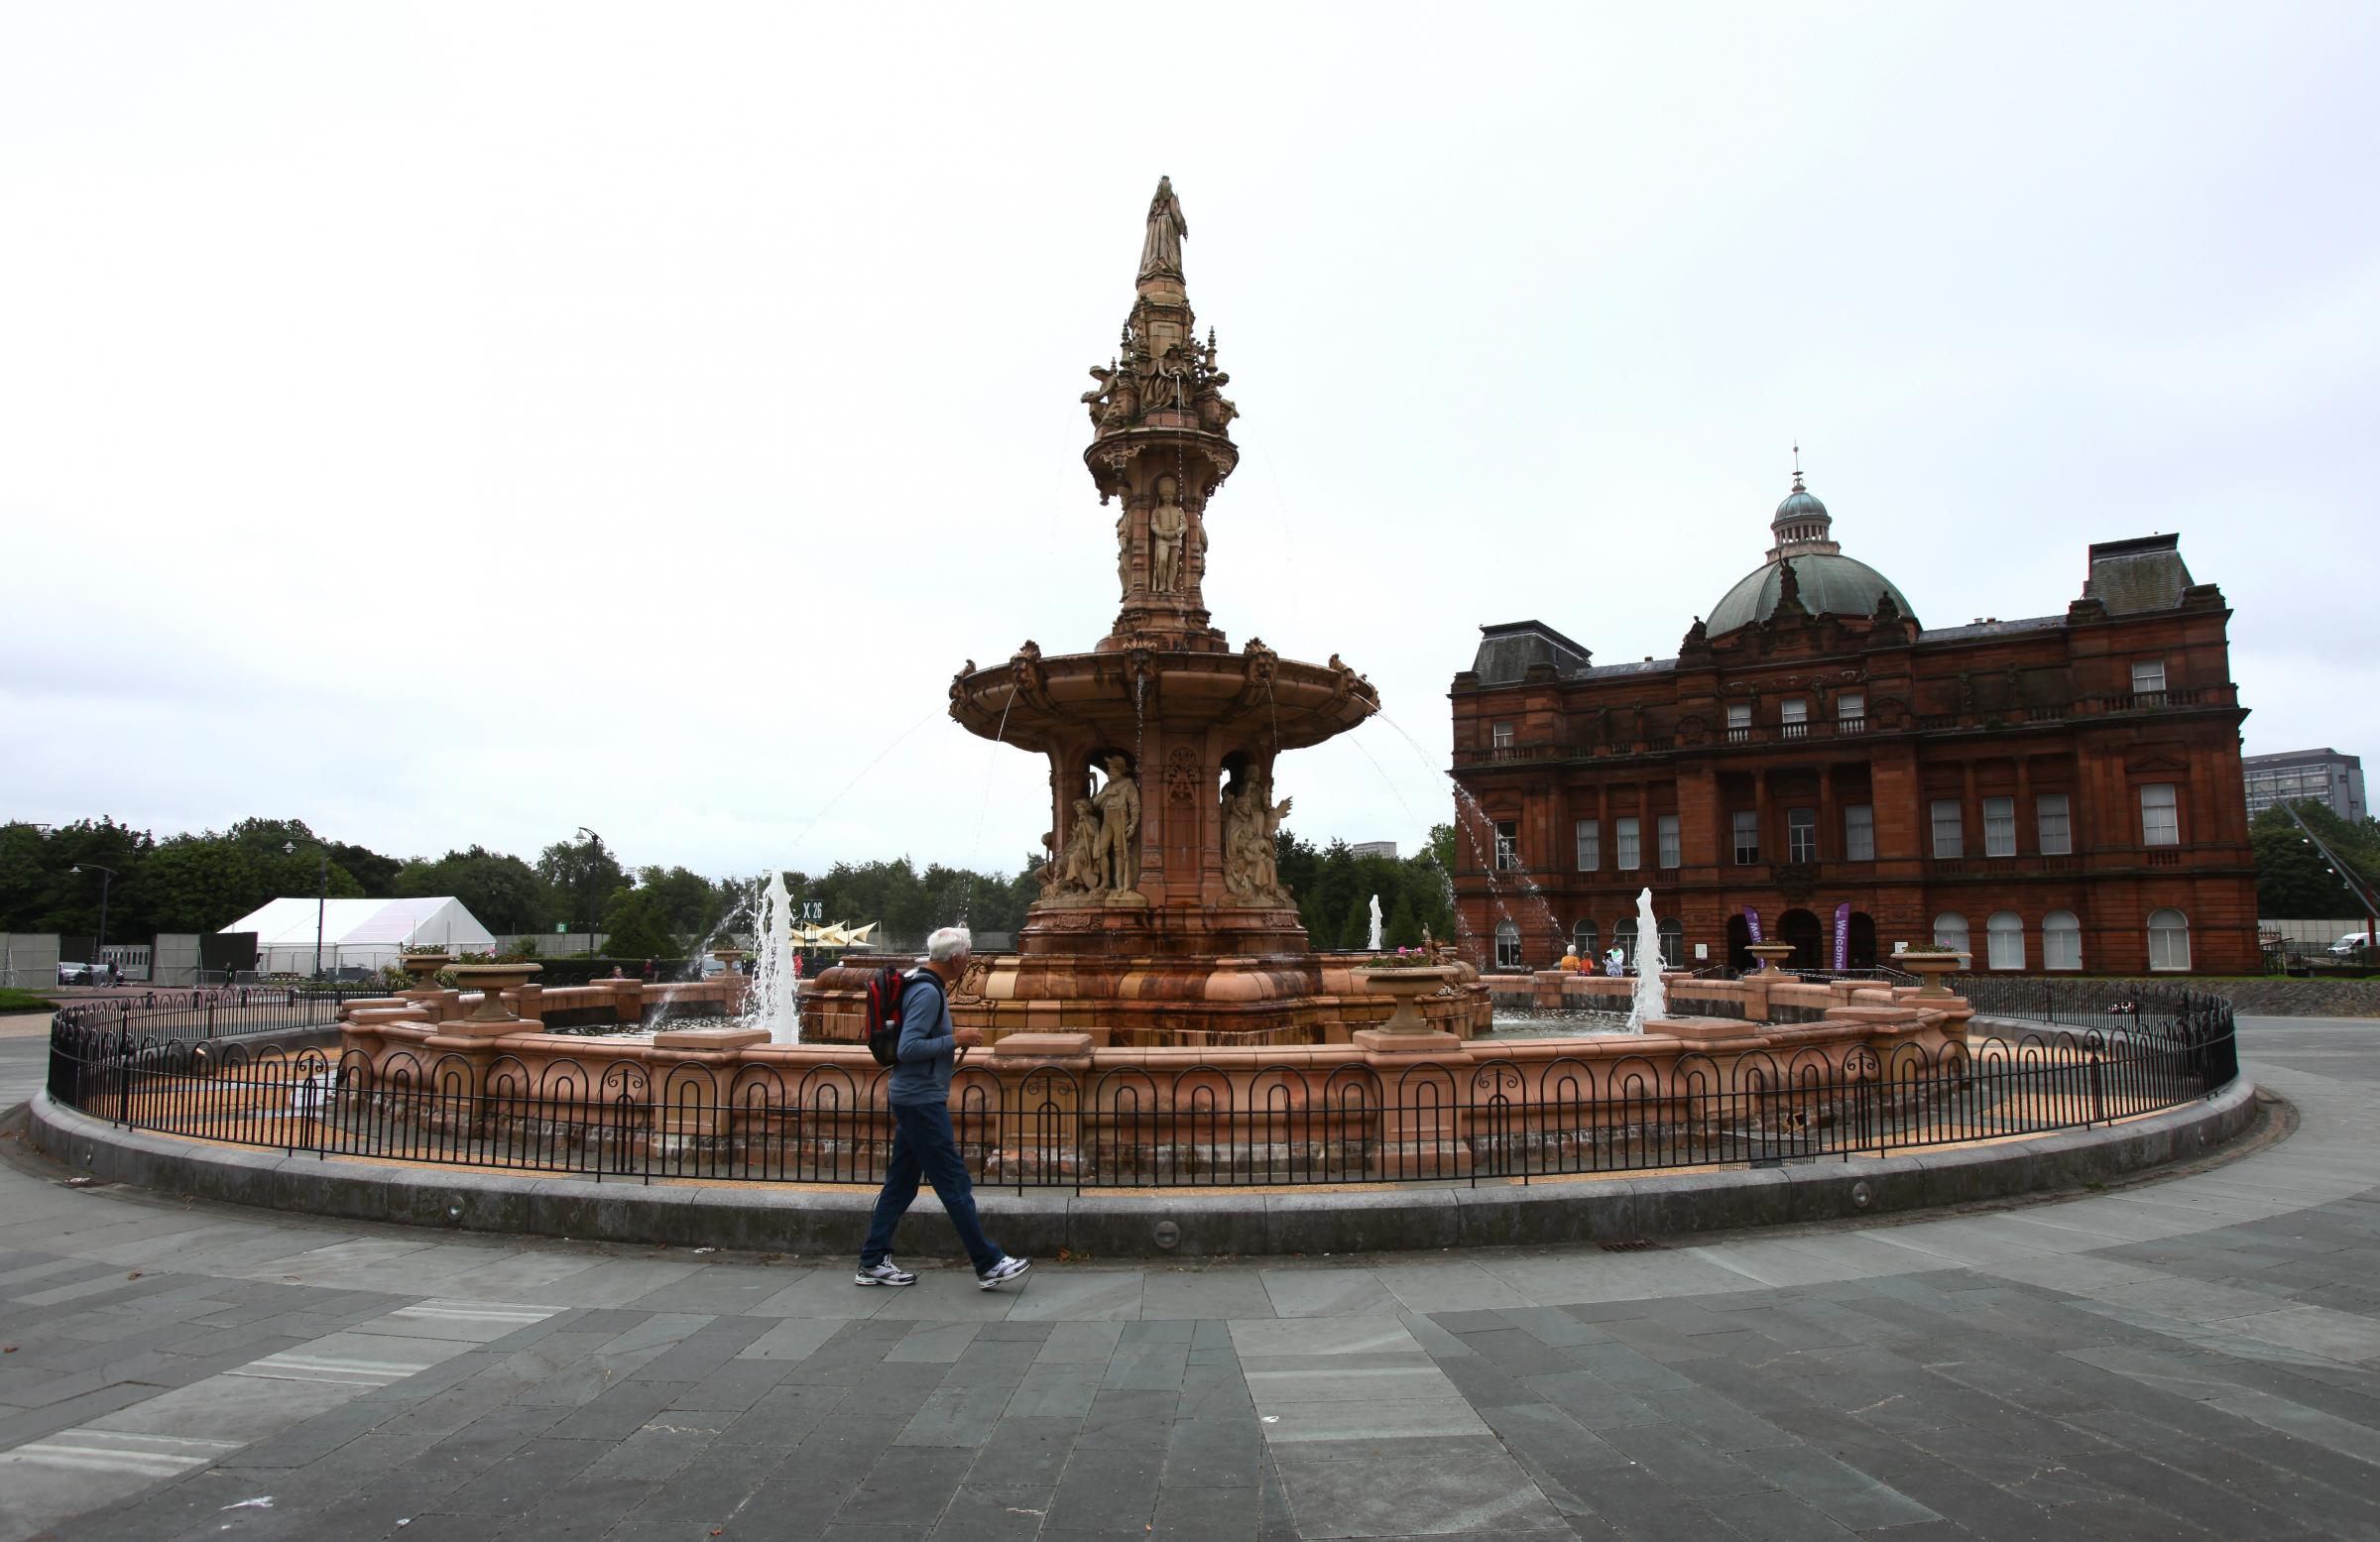 The Peoples Palace, at Glasgow Green, is currently closed. Photograph by Colin Mearns.